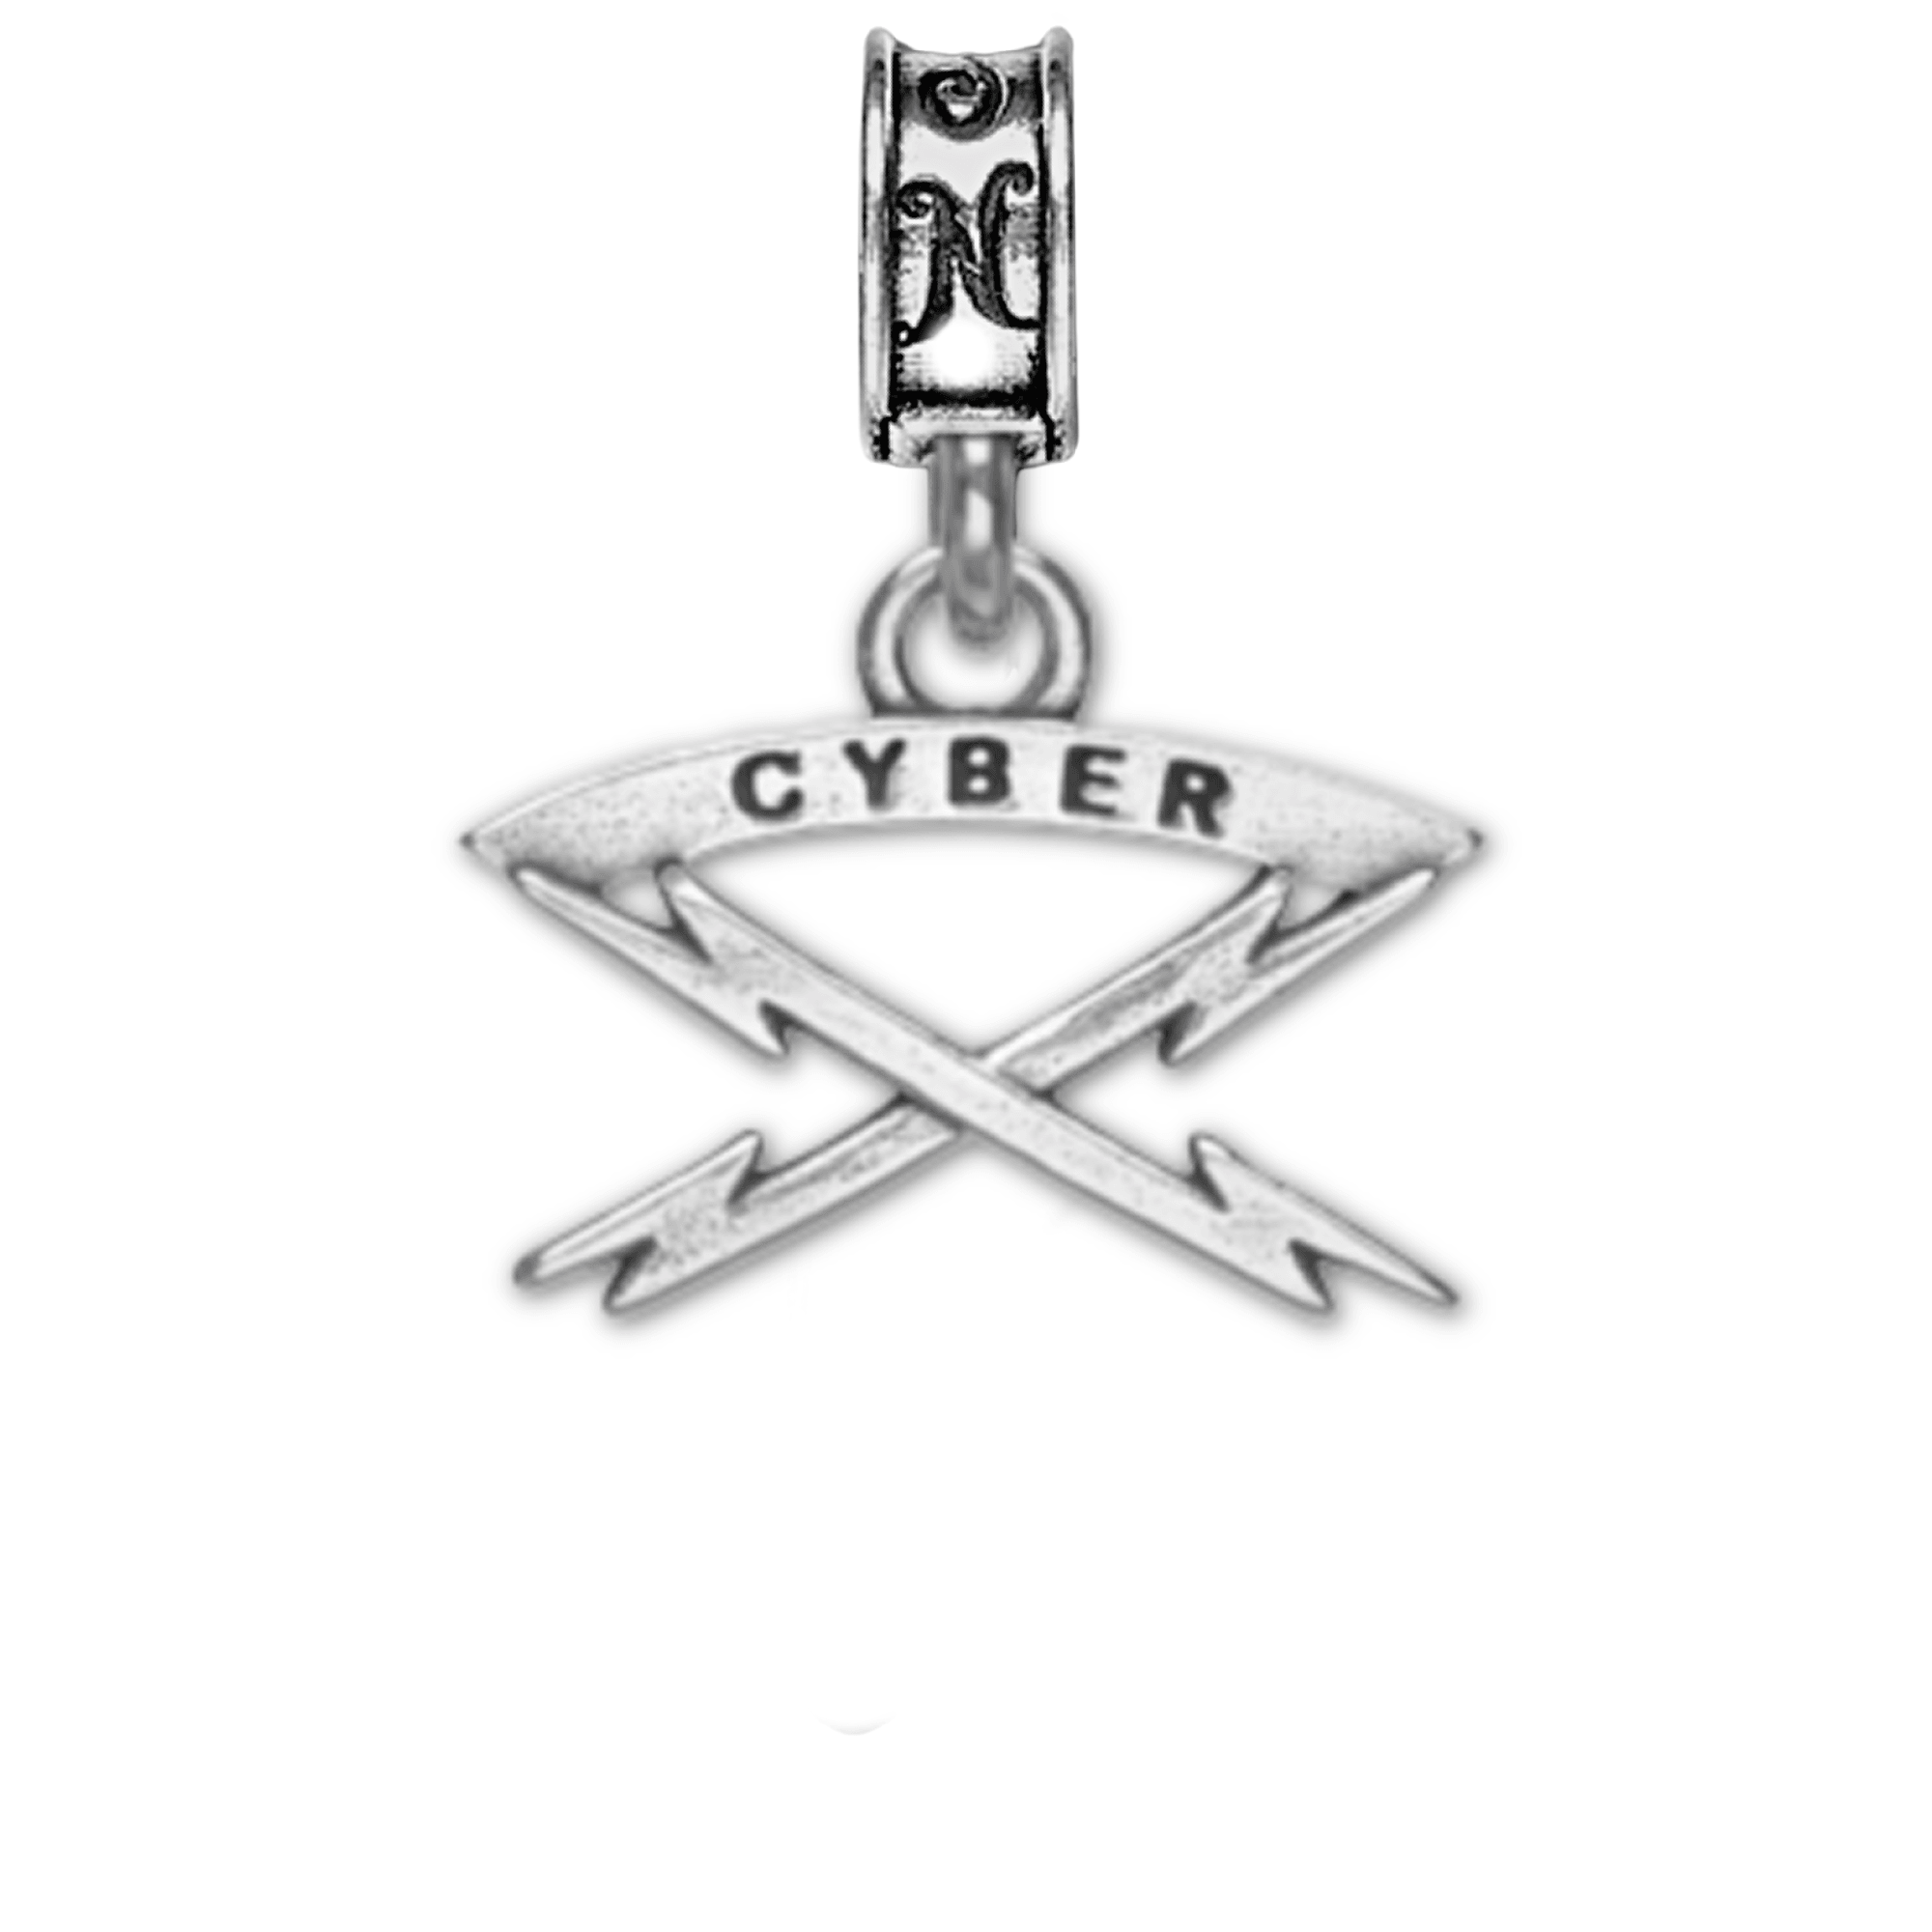 Military Jewelry, Military Charms, Military Gifts, Cyber Insignia